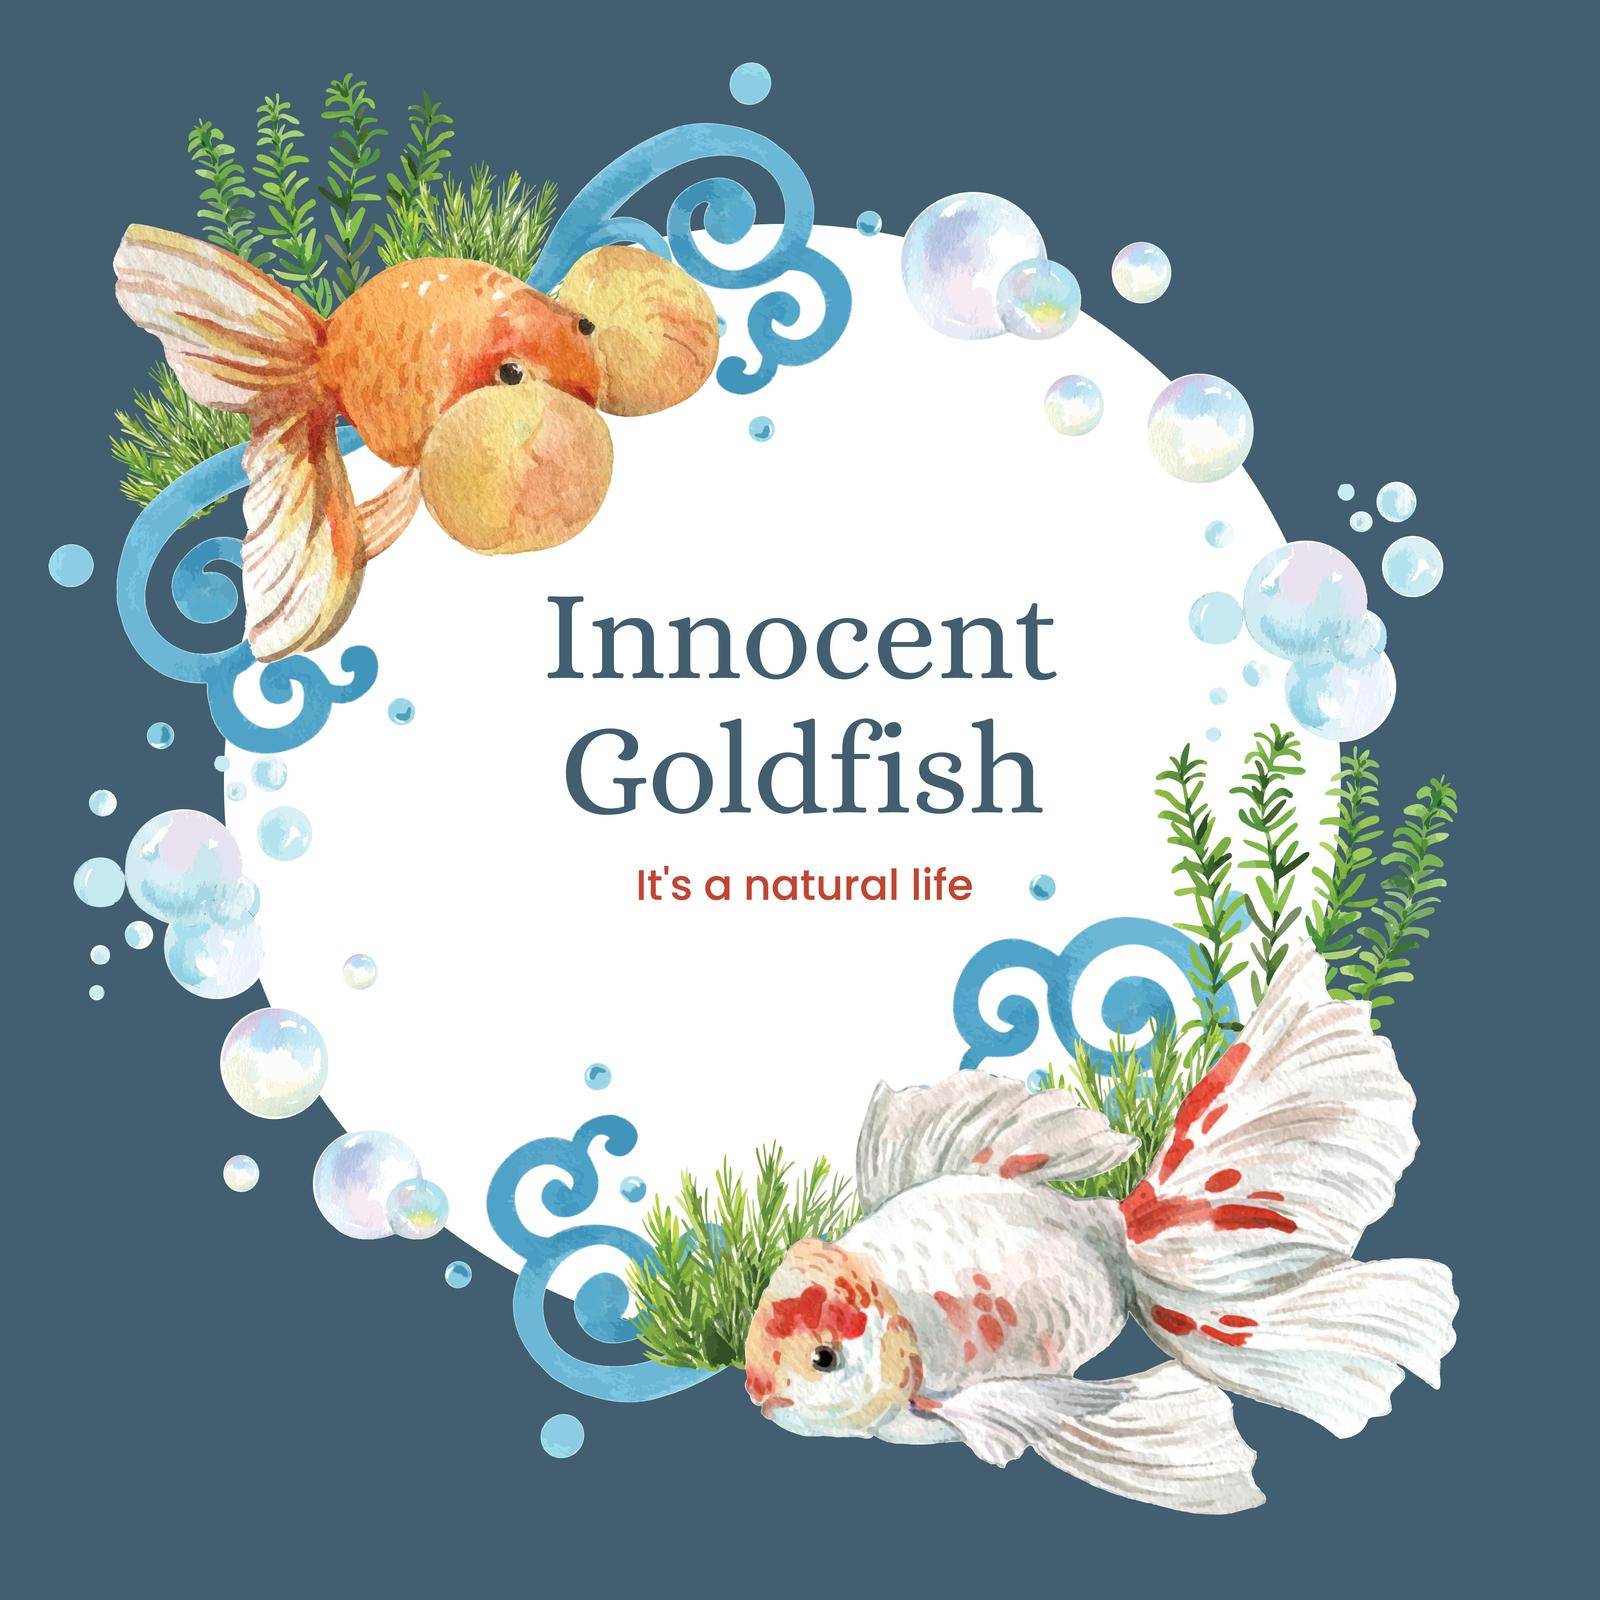 Wreath template with gold fish concept,watercolor style.